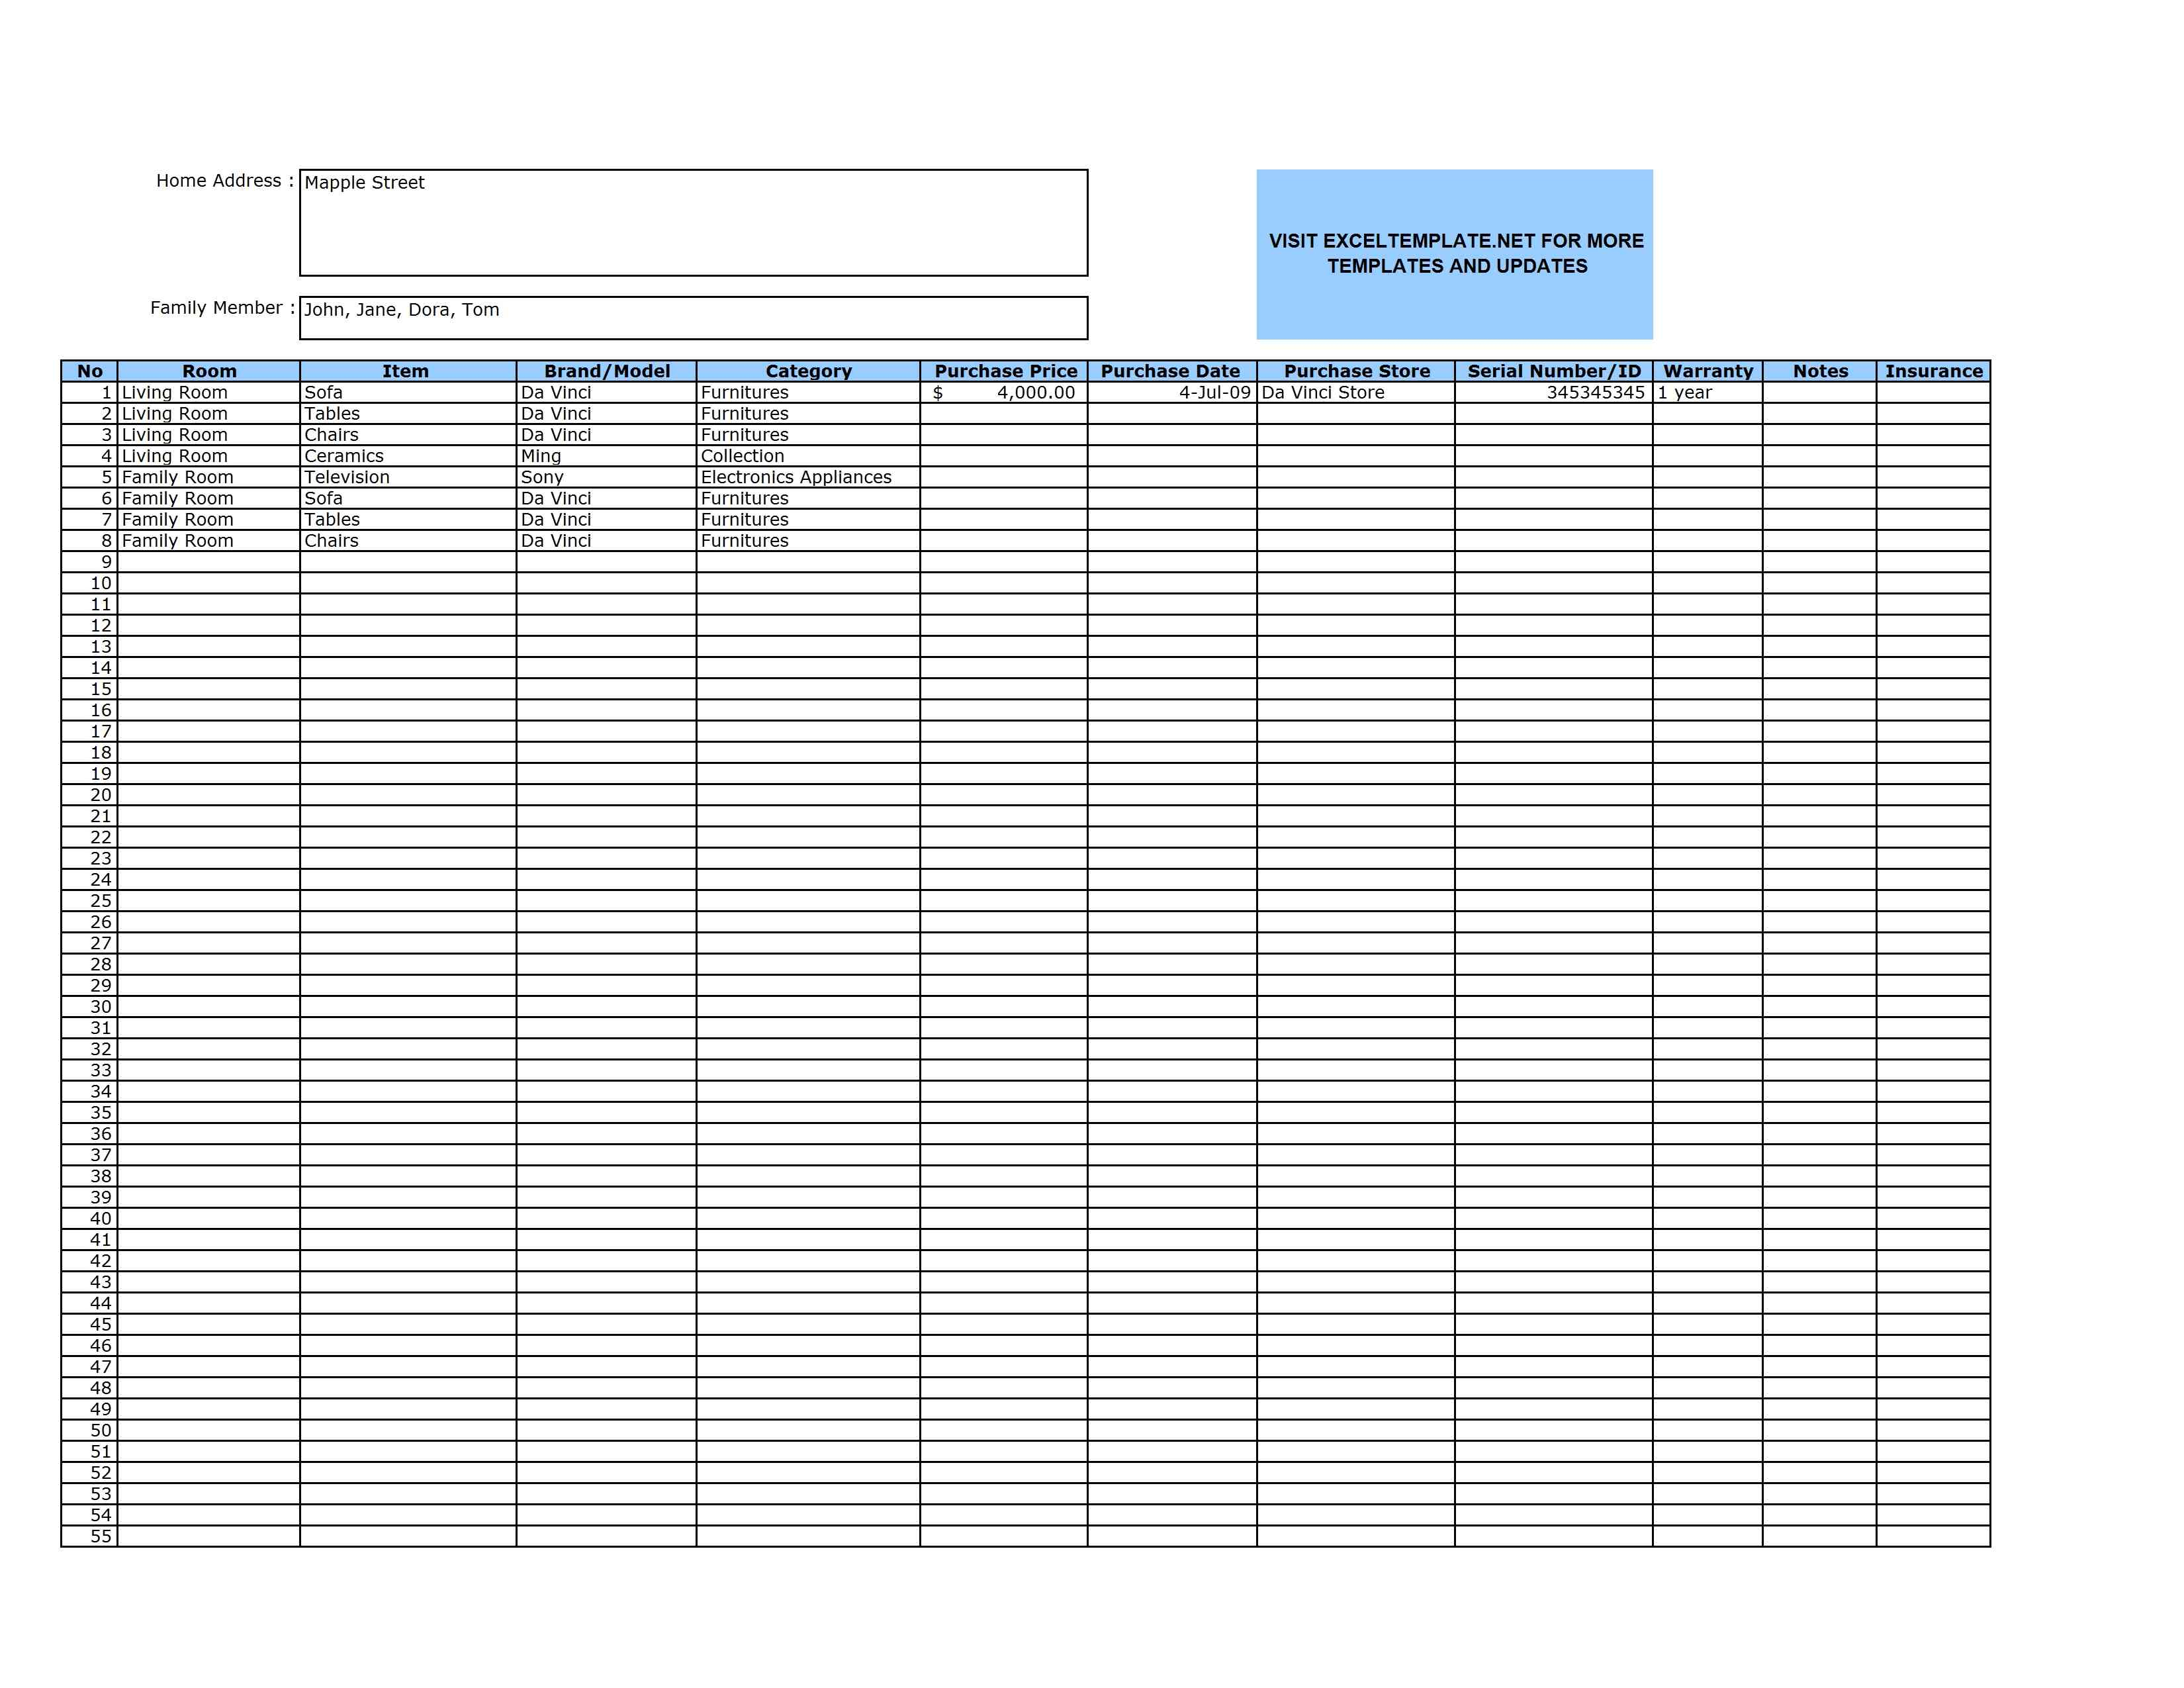 Cattle Inventory Spreadsheet On Excel Spreadsheet Templates Open throughout Excel Inventory Spreadsheet Template